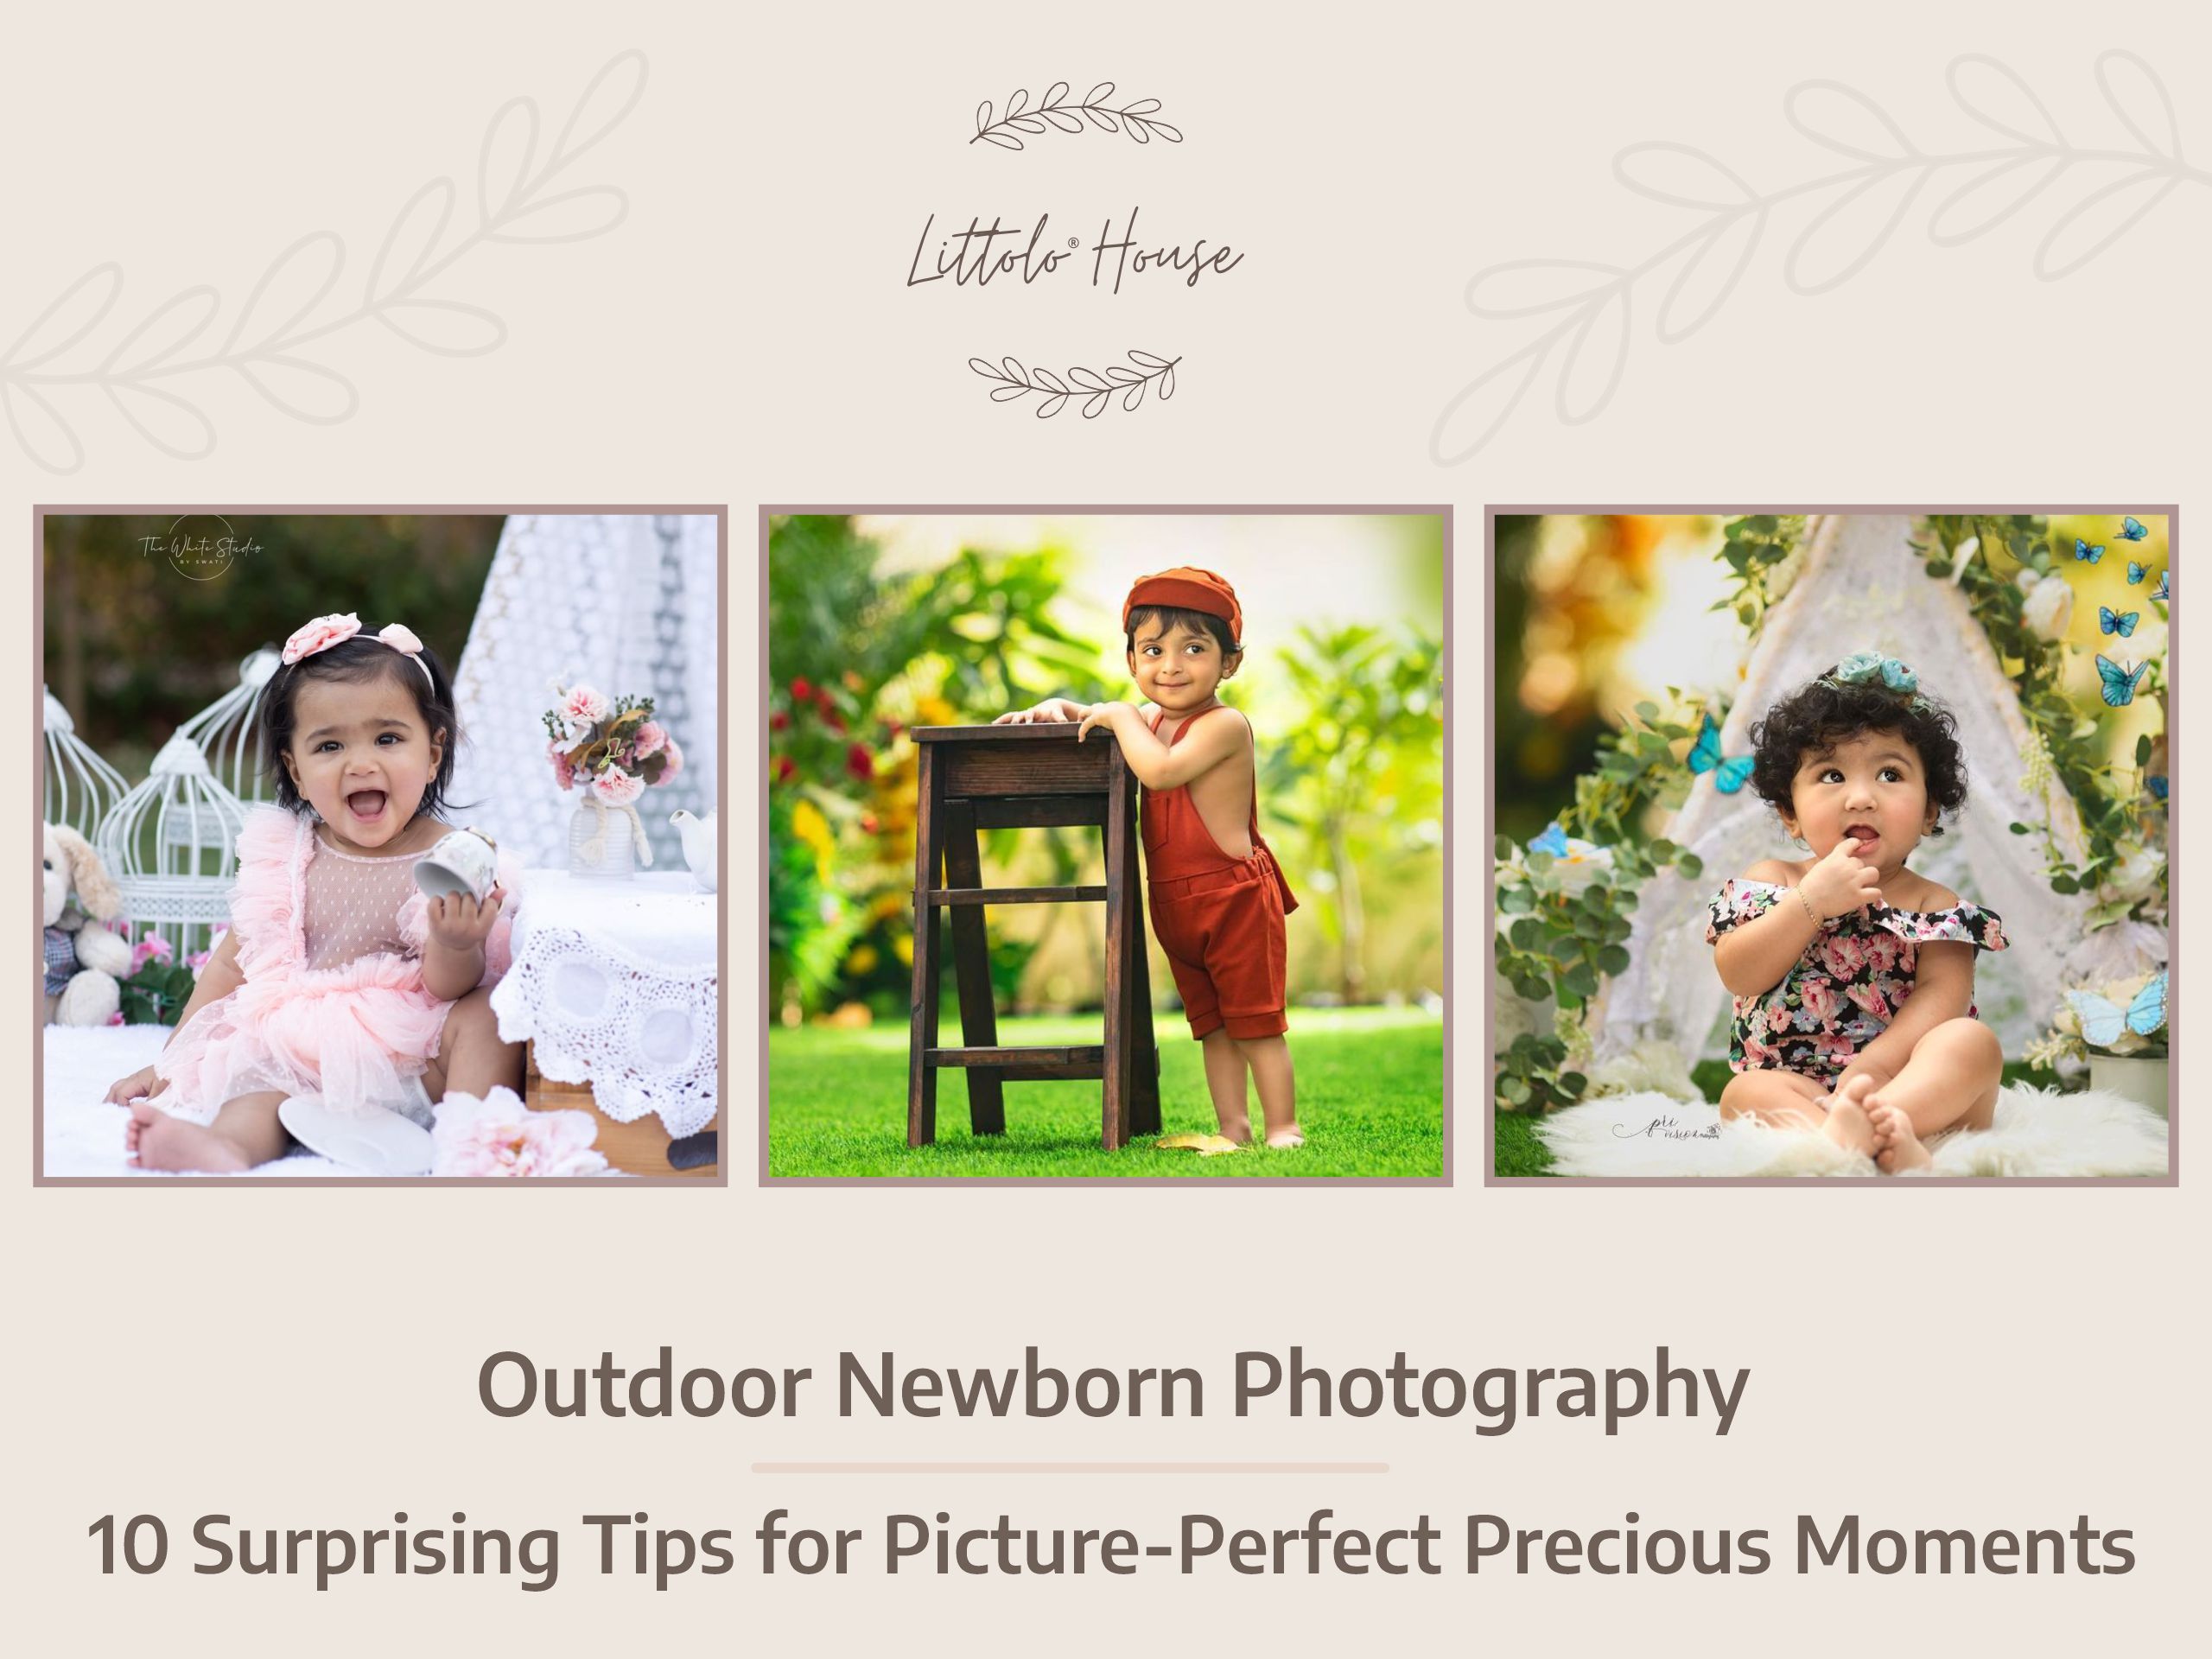 Outdoor Newborn Photography: 10 Surprising Tips for Picture-Perfect Precious Moments